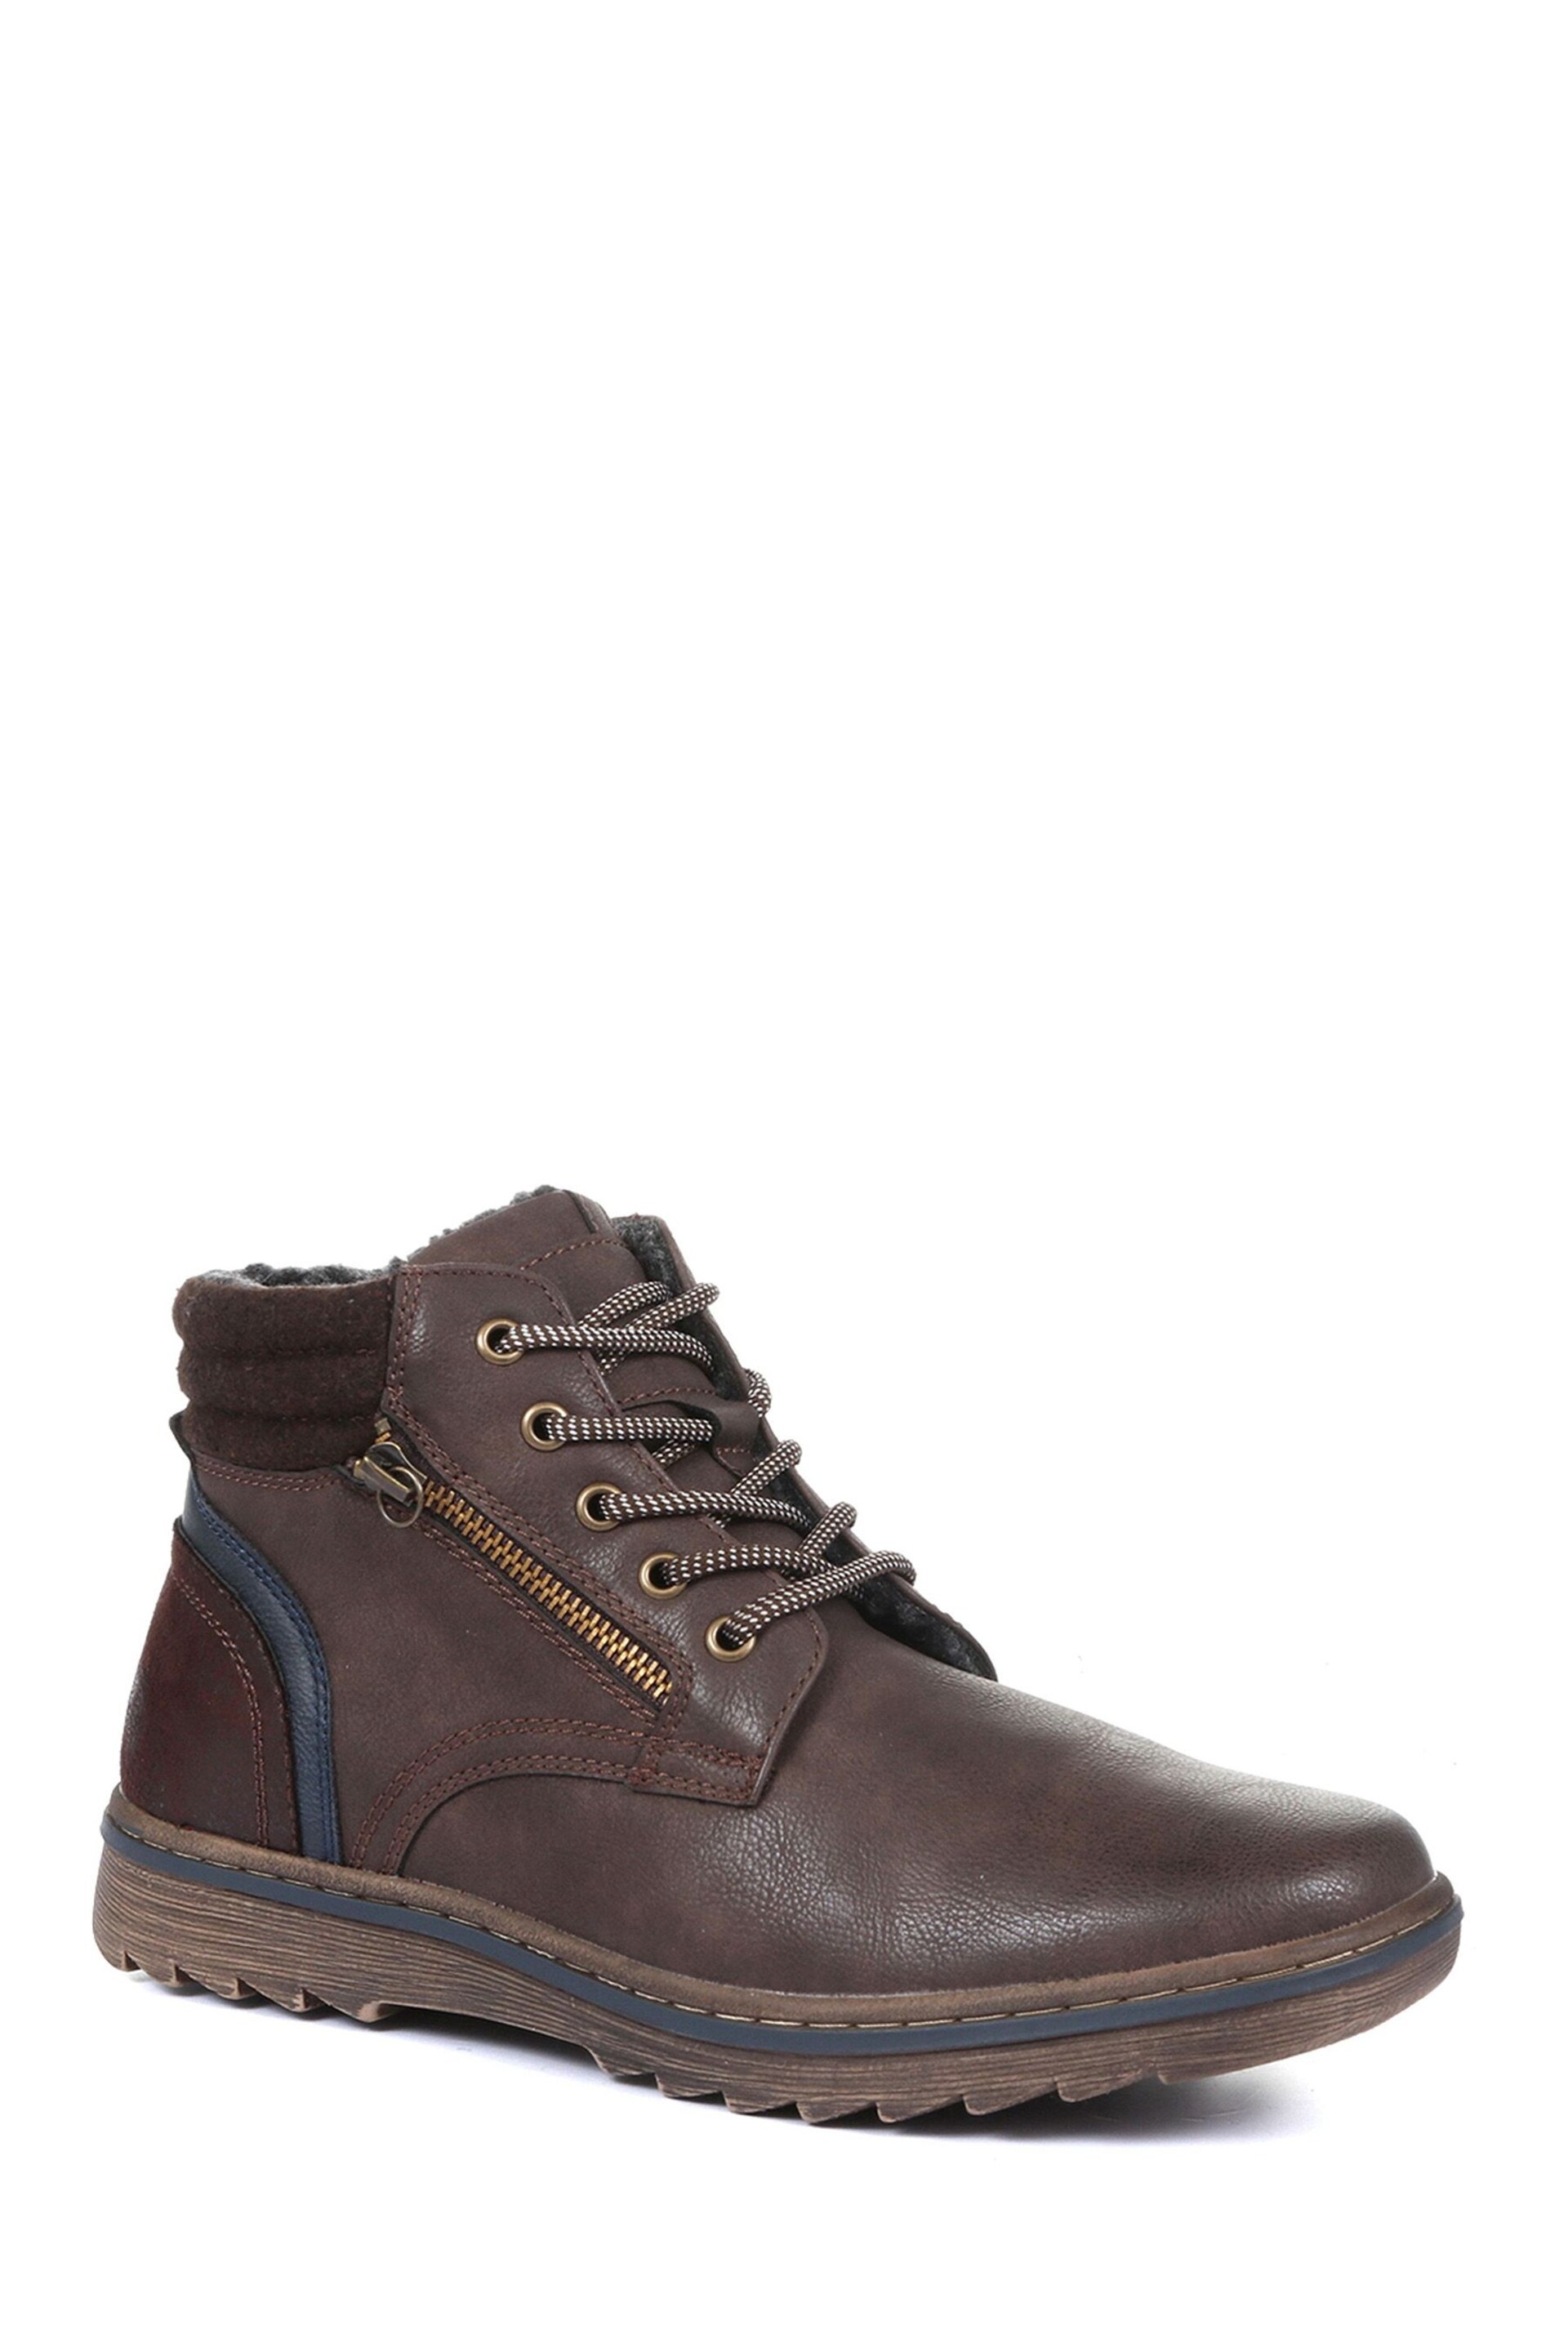 Pavers Brown Lace-Up Ankle Boots - Image 2 of 5